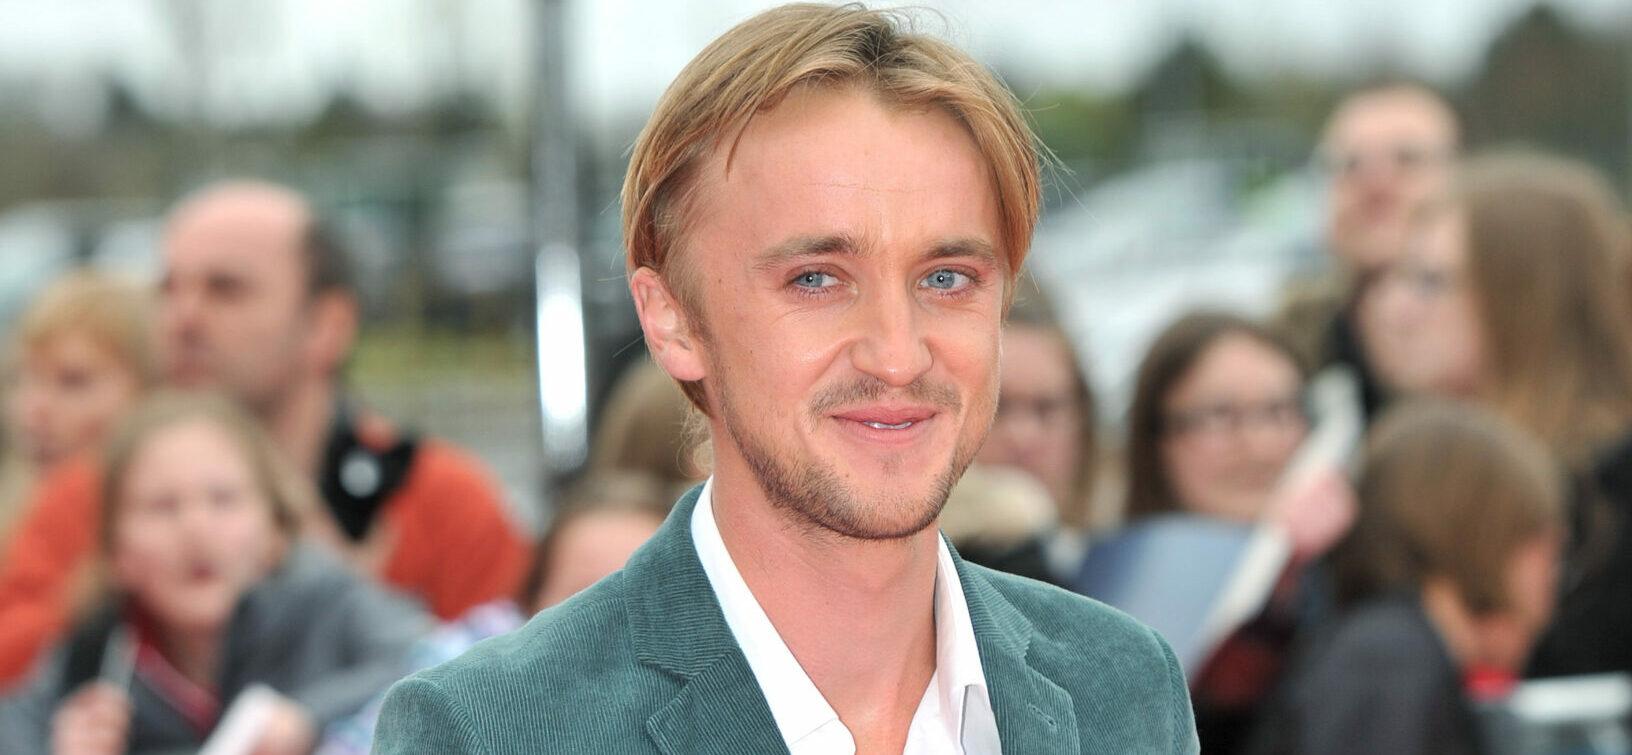 ‘Harry Potter’ Star Tom Felton Breaks His Silence On ‘Scary’ Ryder Cup Incident